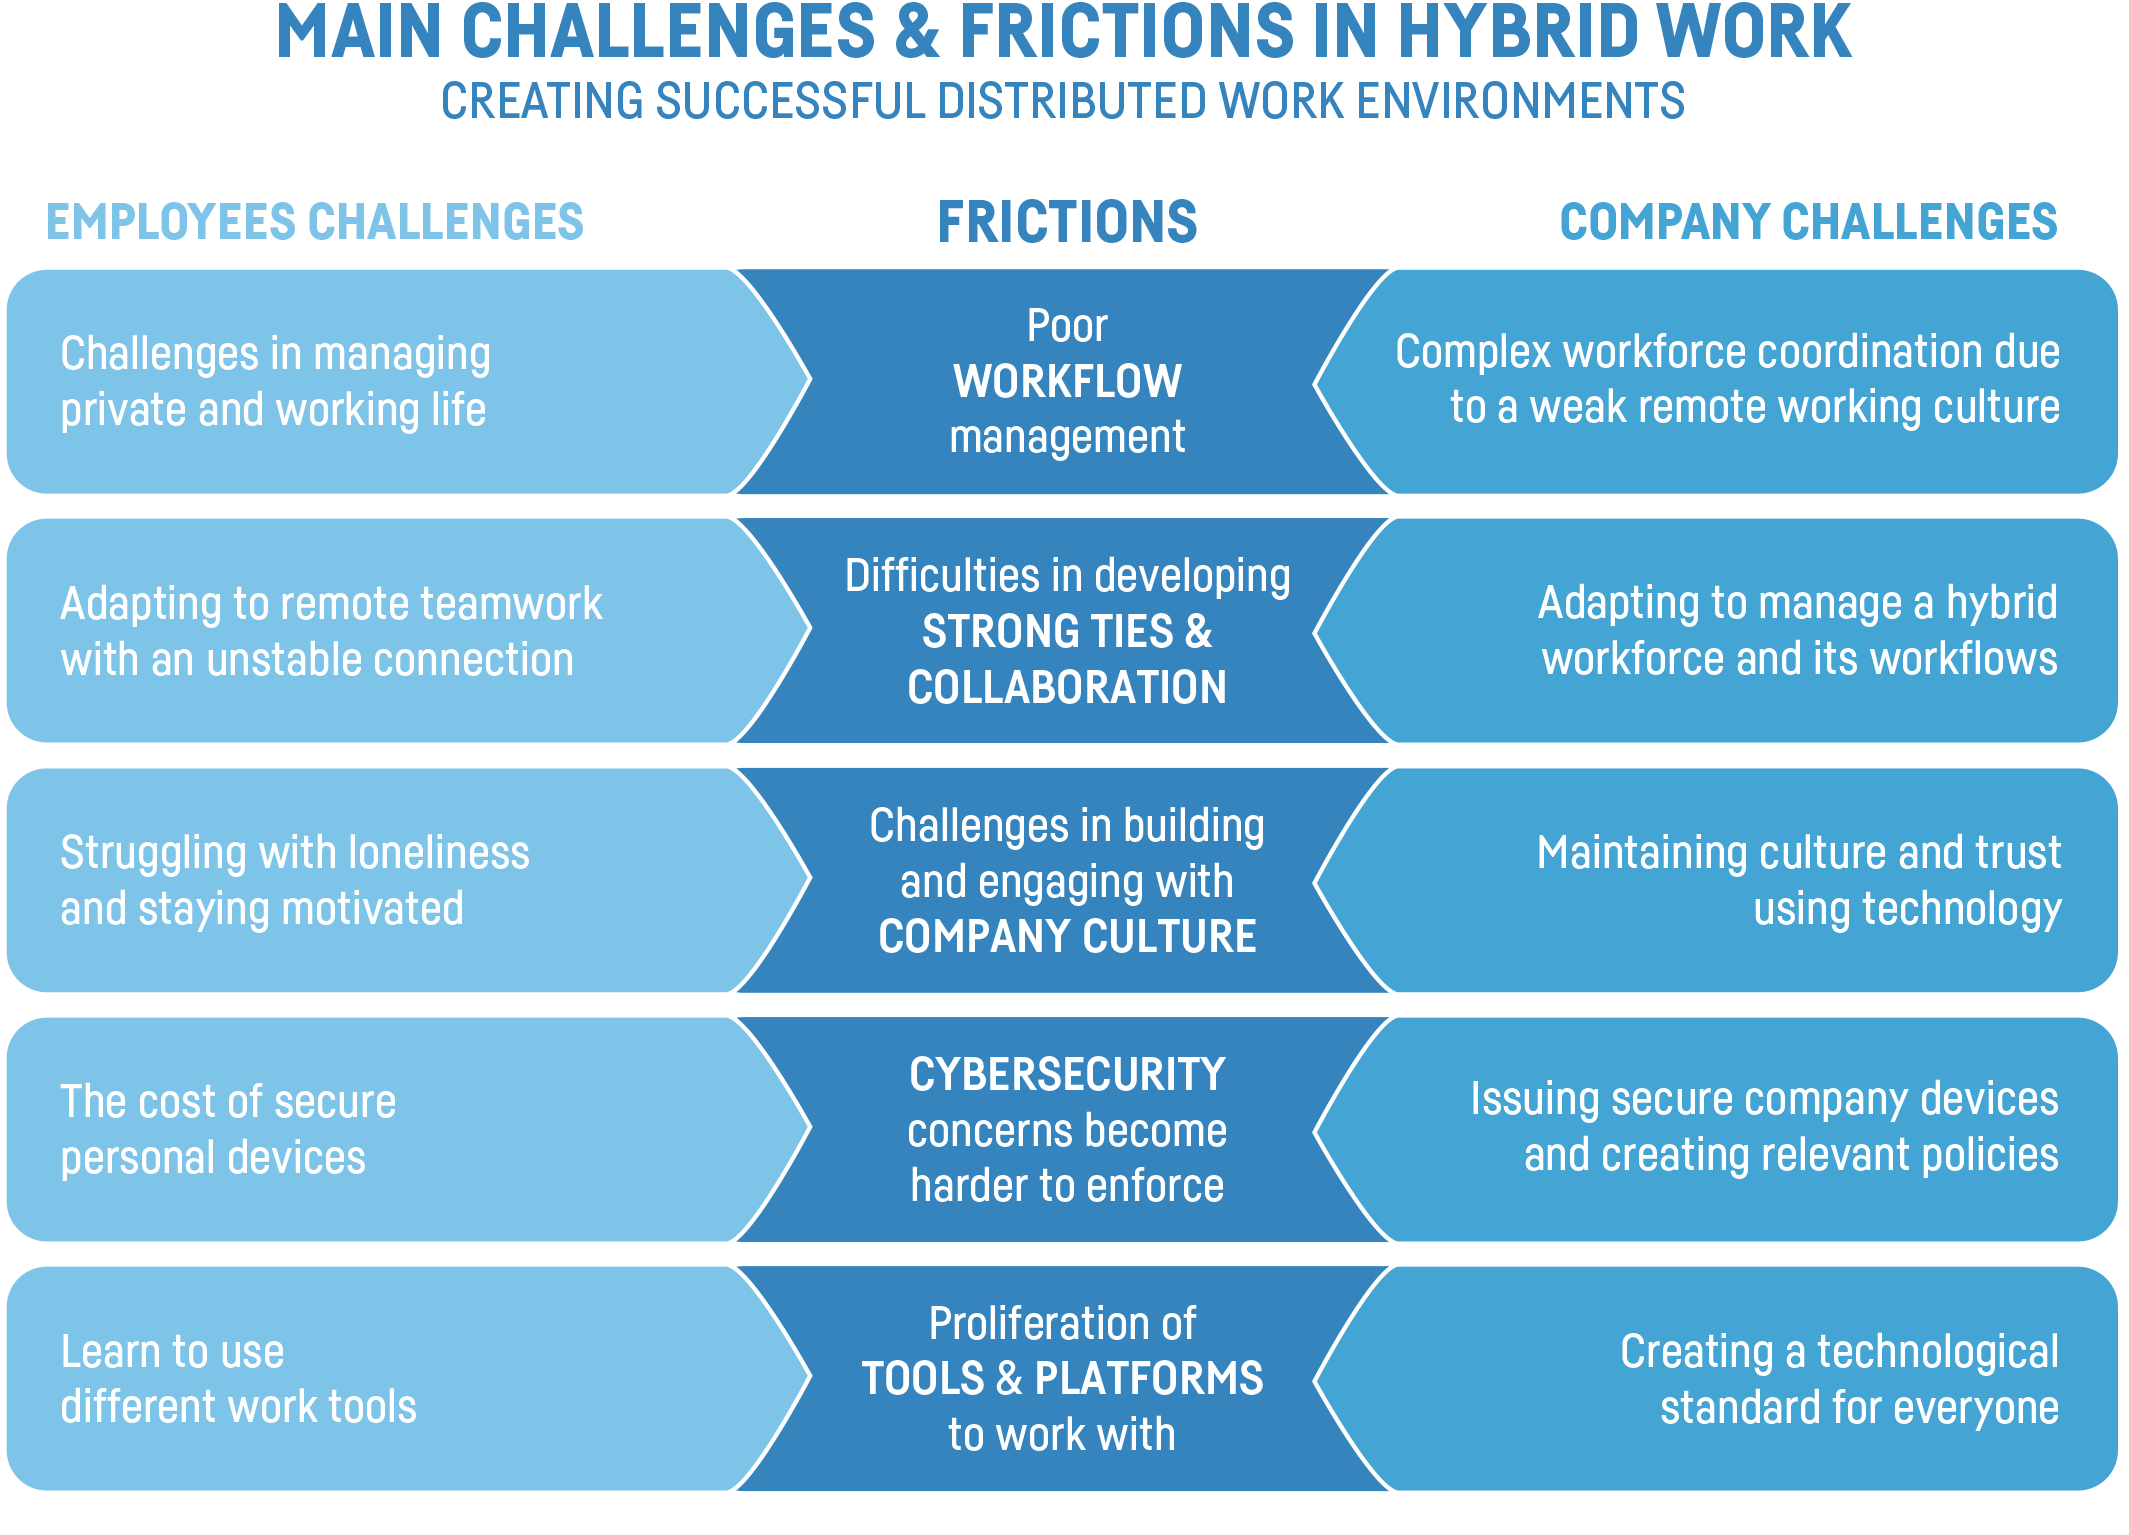 Main Challenges & Frictions in Hybrid Work